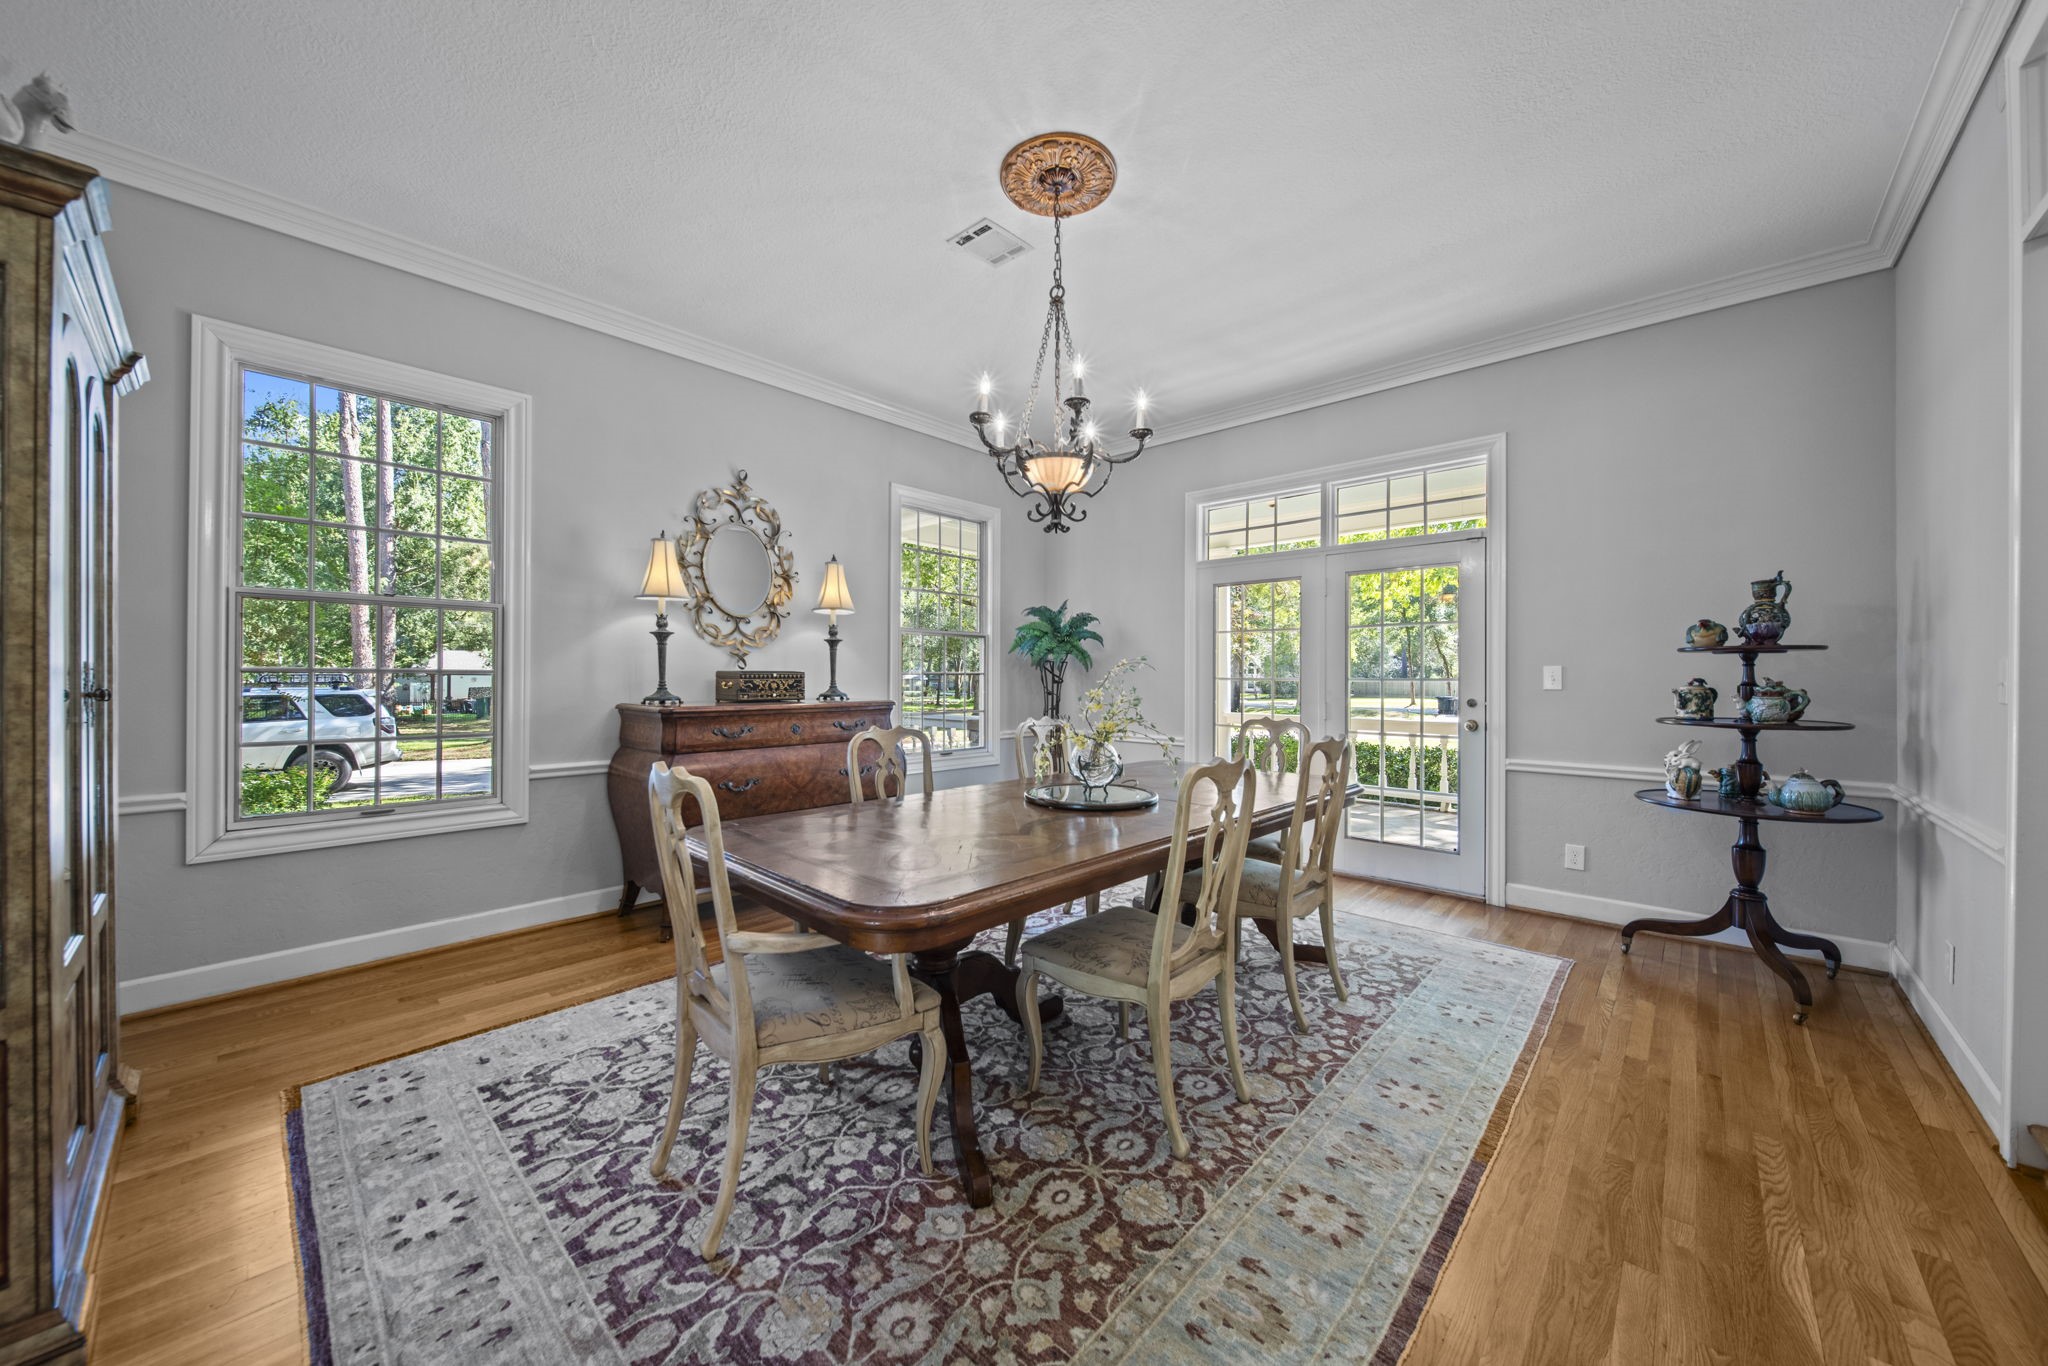 Formal dining area with doors leading out to the front porch. Excellent room for hosting formal or informal dinner parties. This room has large windows and extra doors that lets lots of natural light into the home.